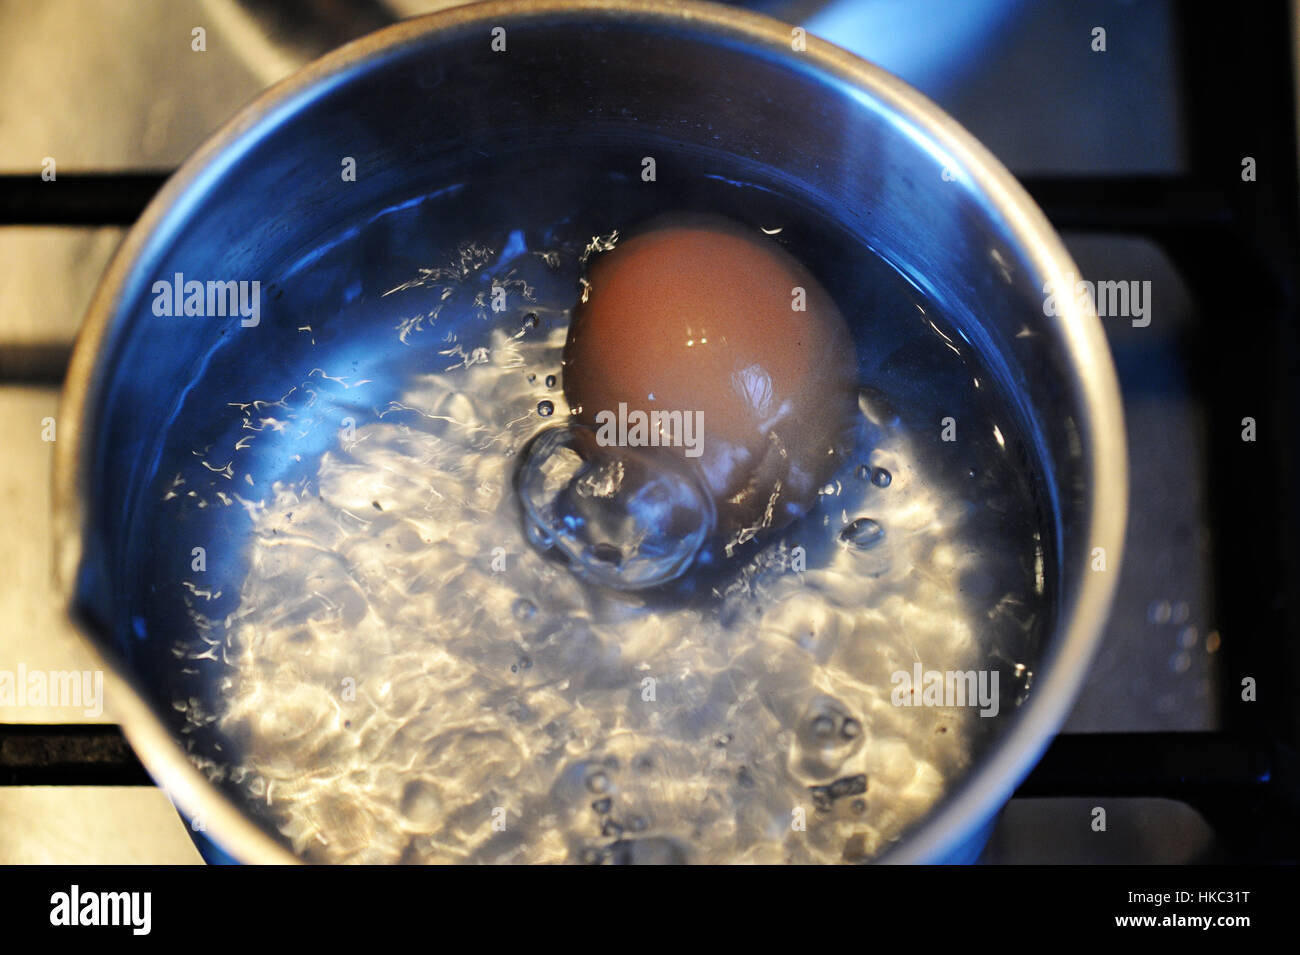 Egg starting to boil in a steel pot Stock Photo